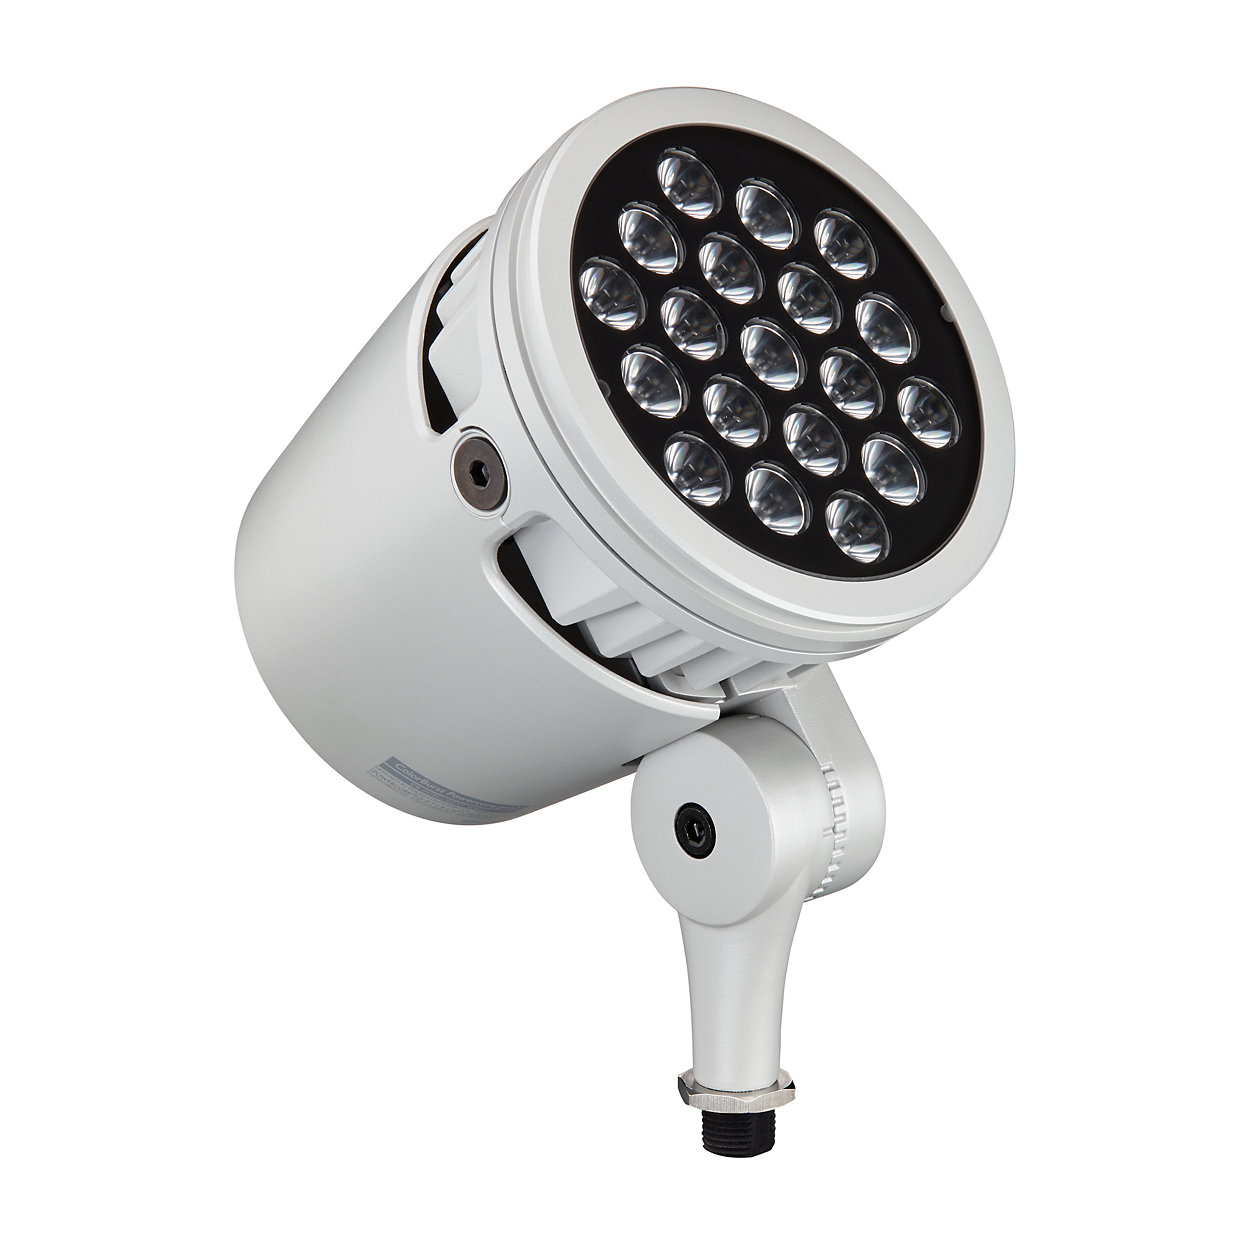 Architectural and landscape LED spotlight with solid white light